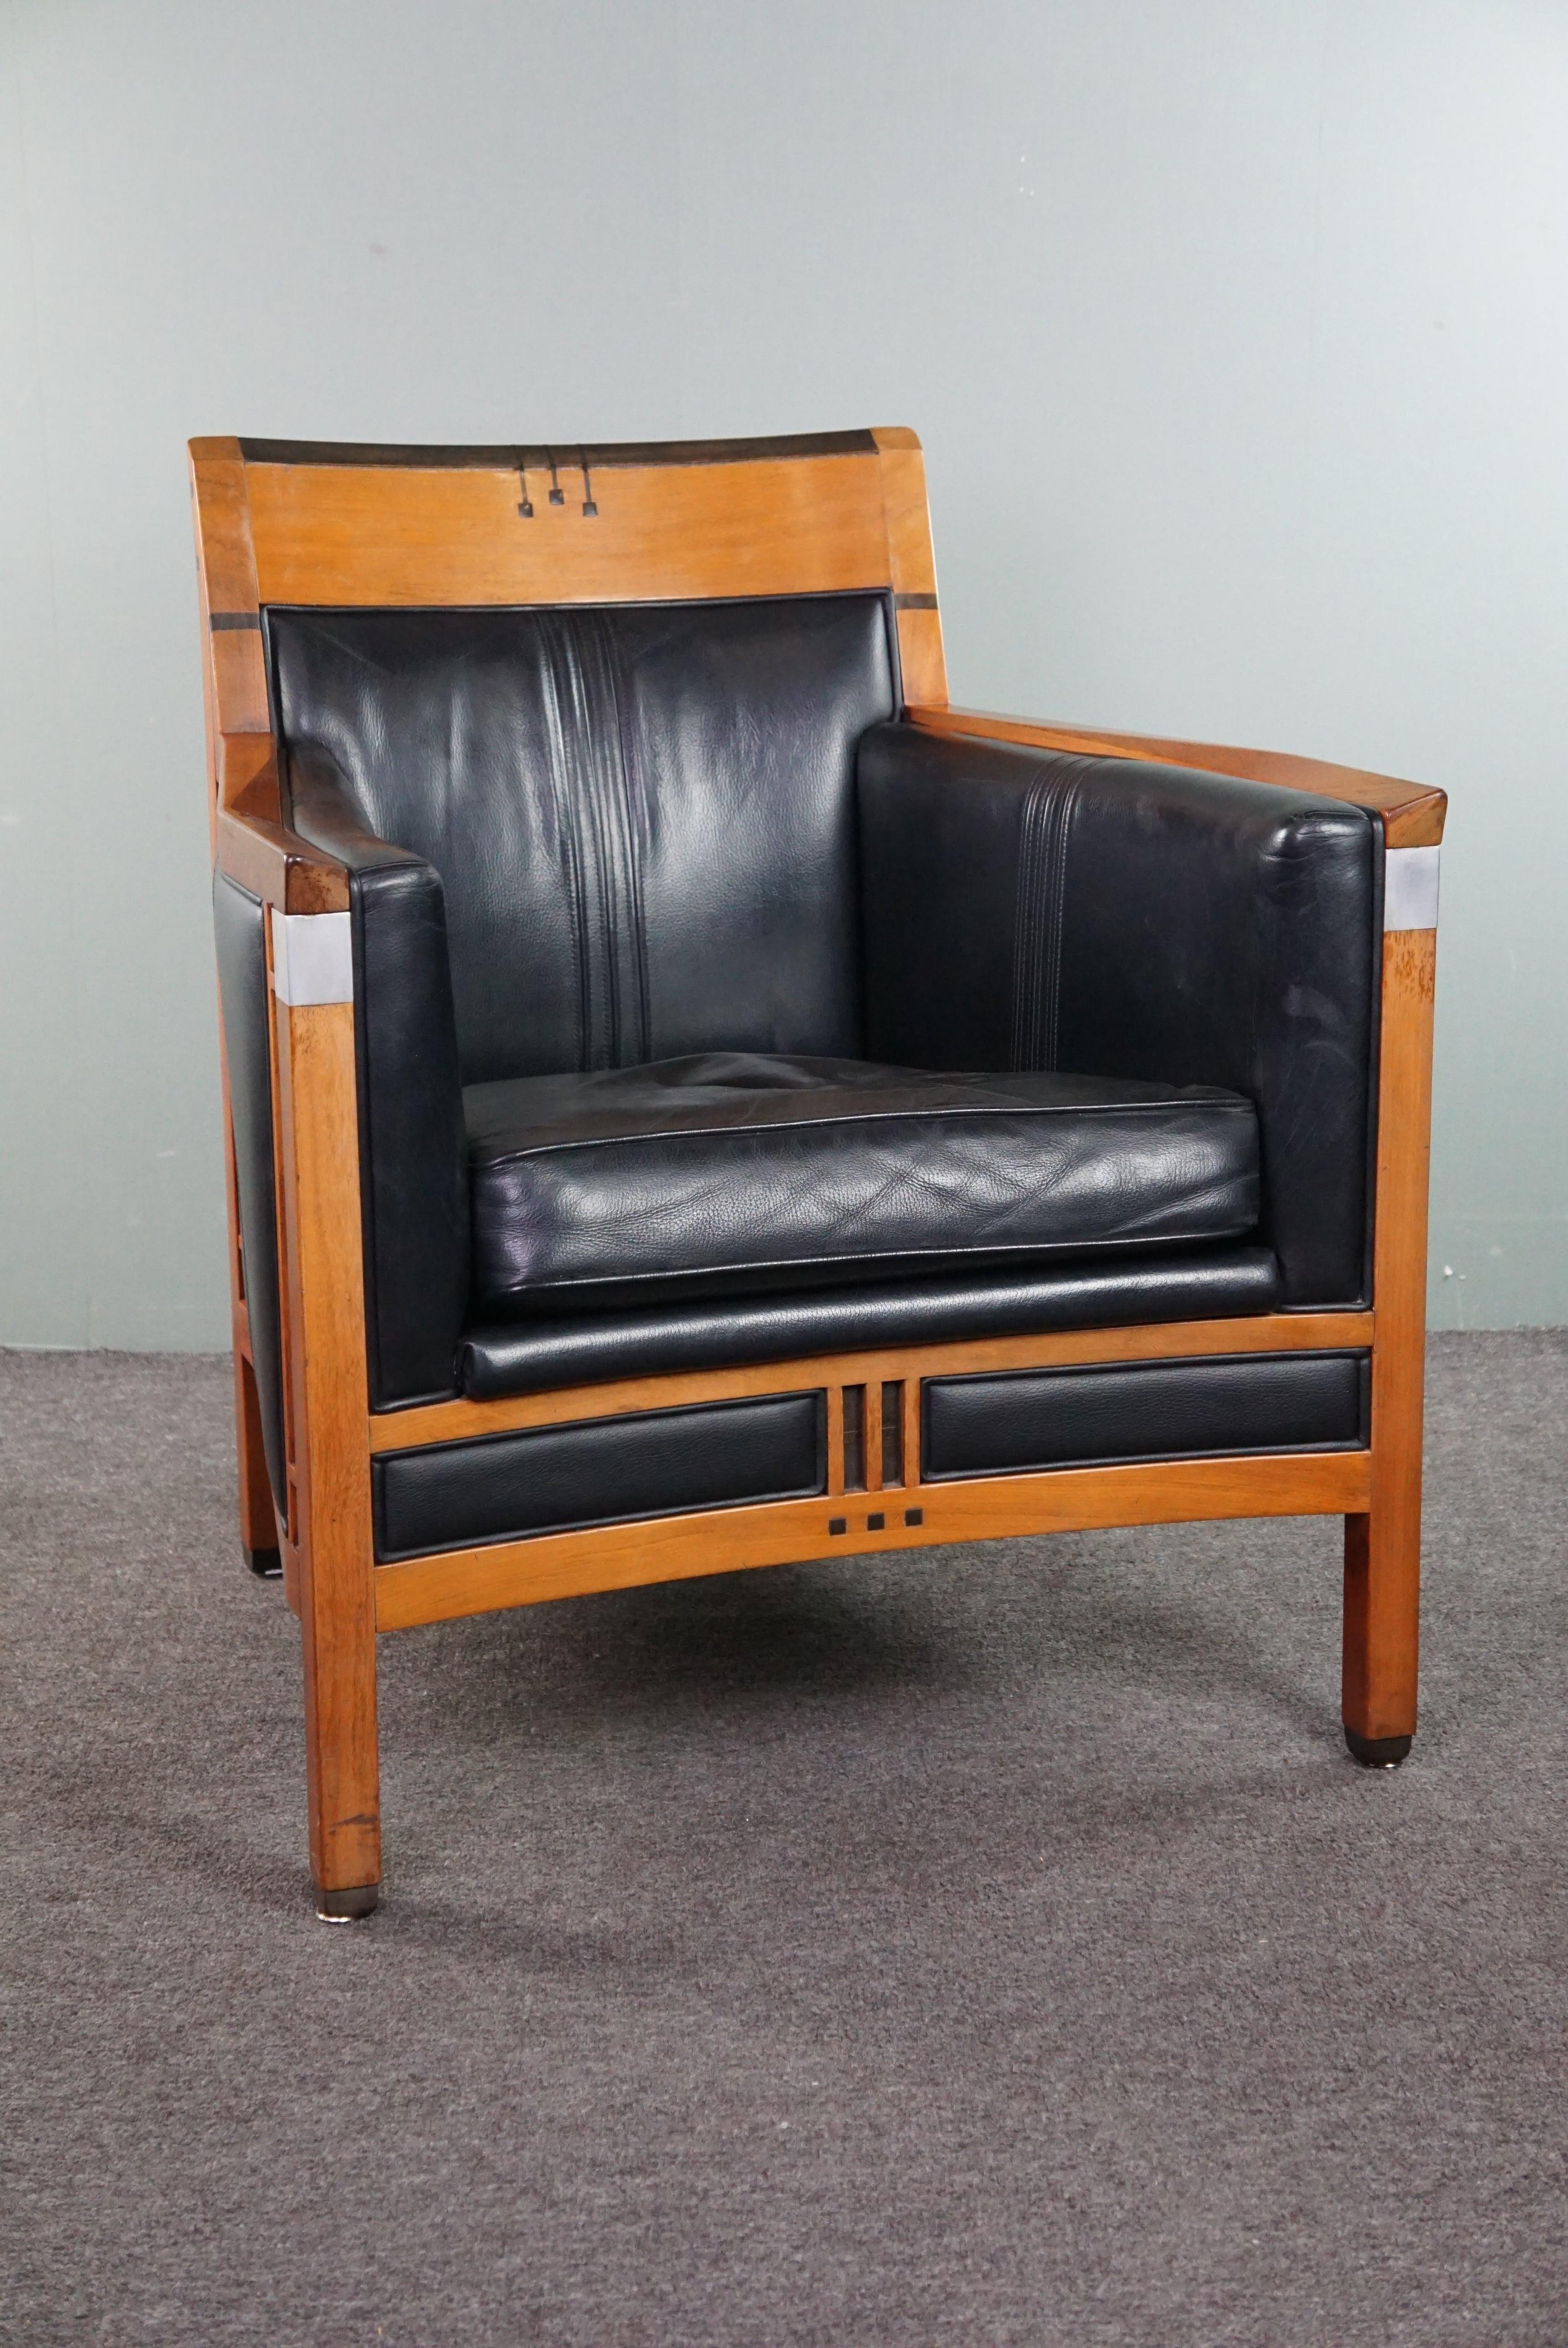 Offered: this fantastic Schuitema Decoforma Art Deco design armchair with black leather and beautiful accents.

A piece of furniture designed and crafted by Schuitema equals stunning design and very high quality, just like this beautiful design